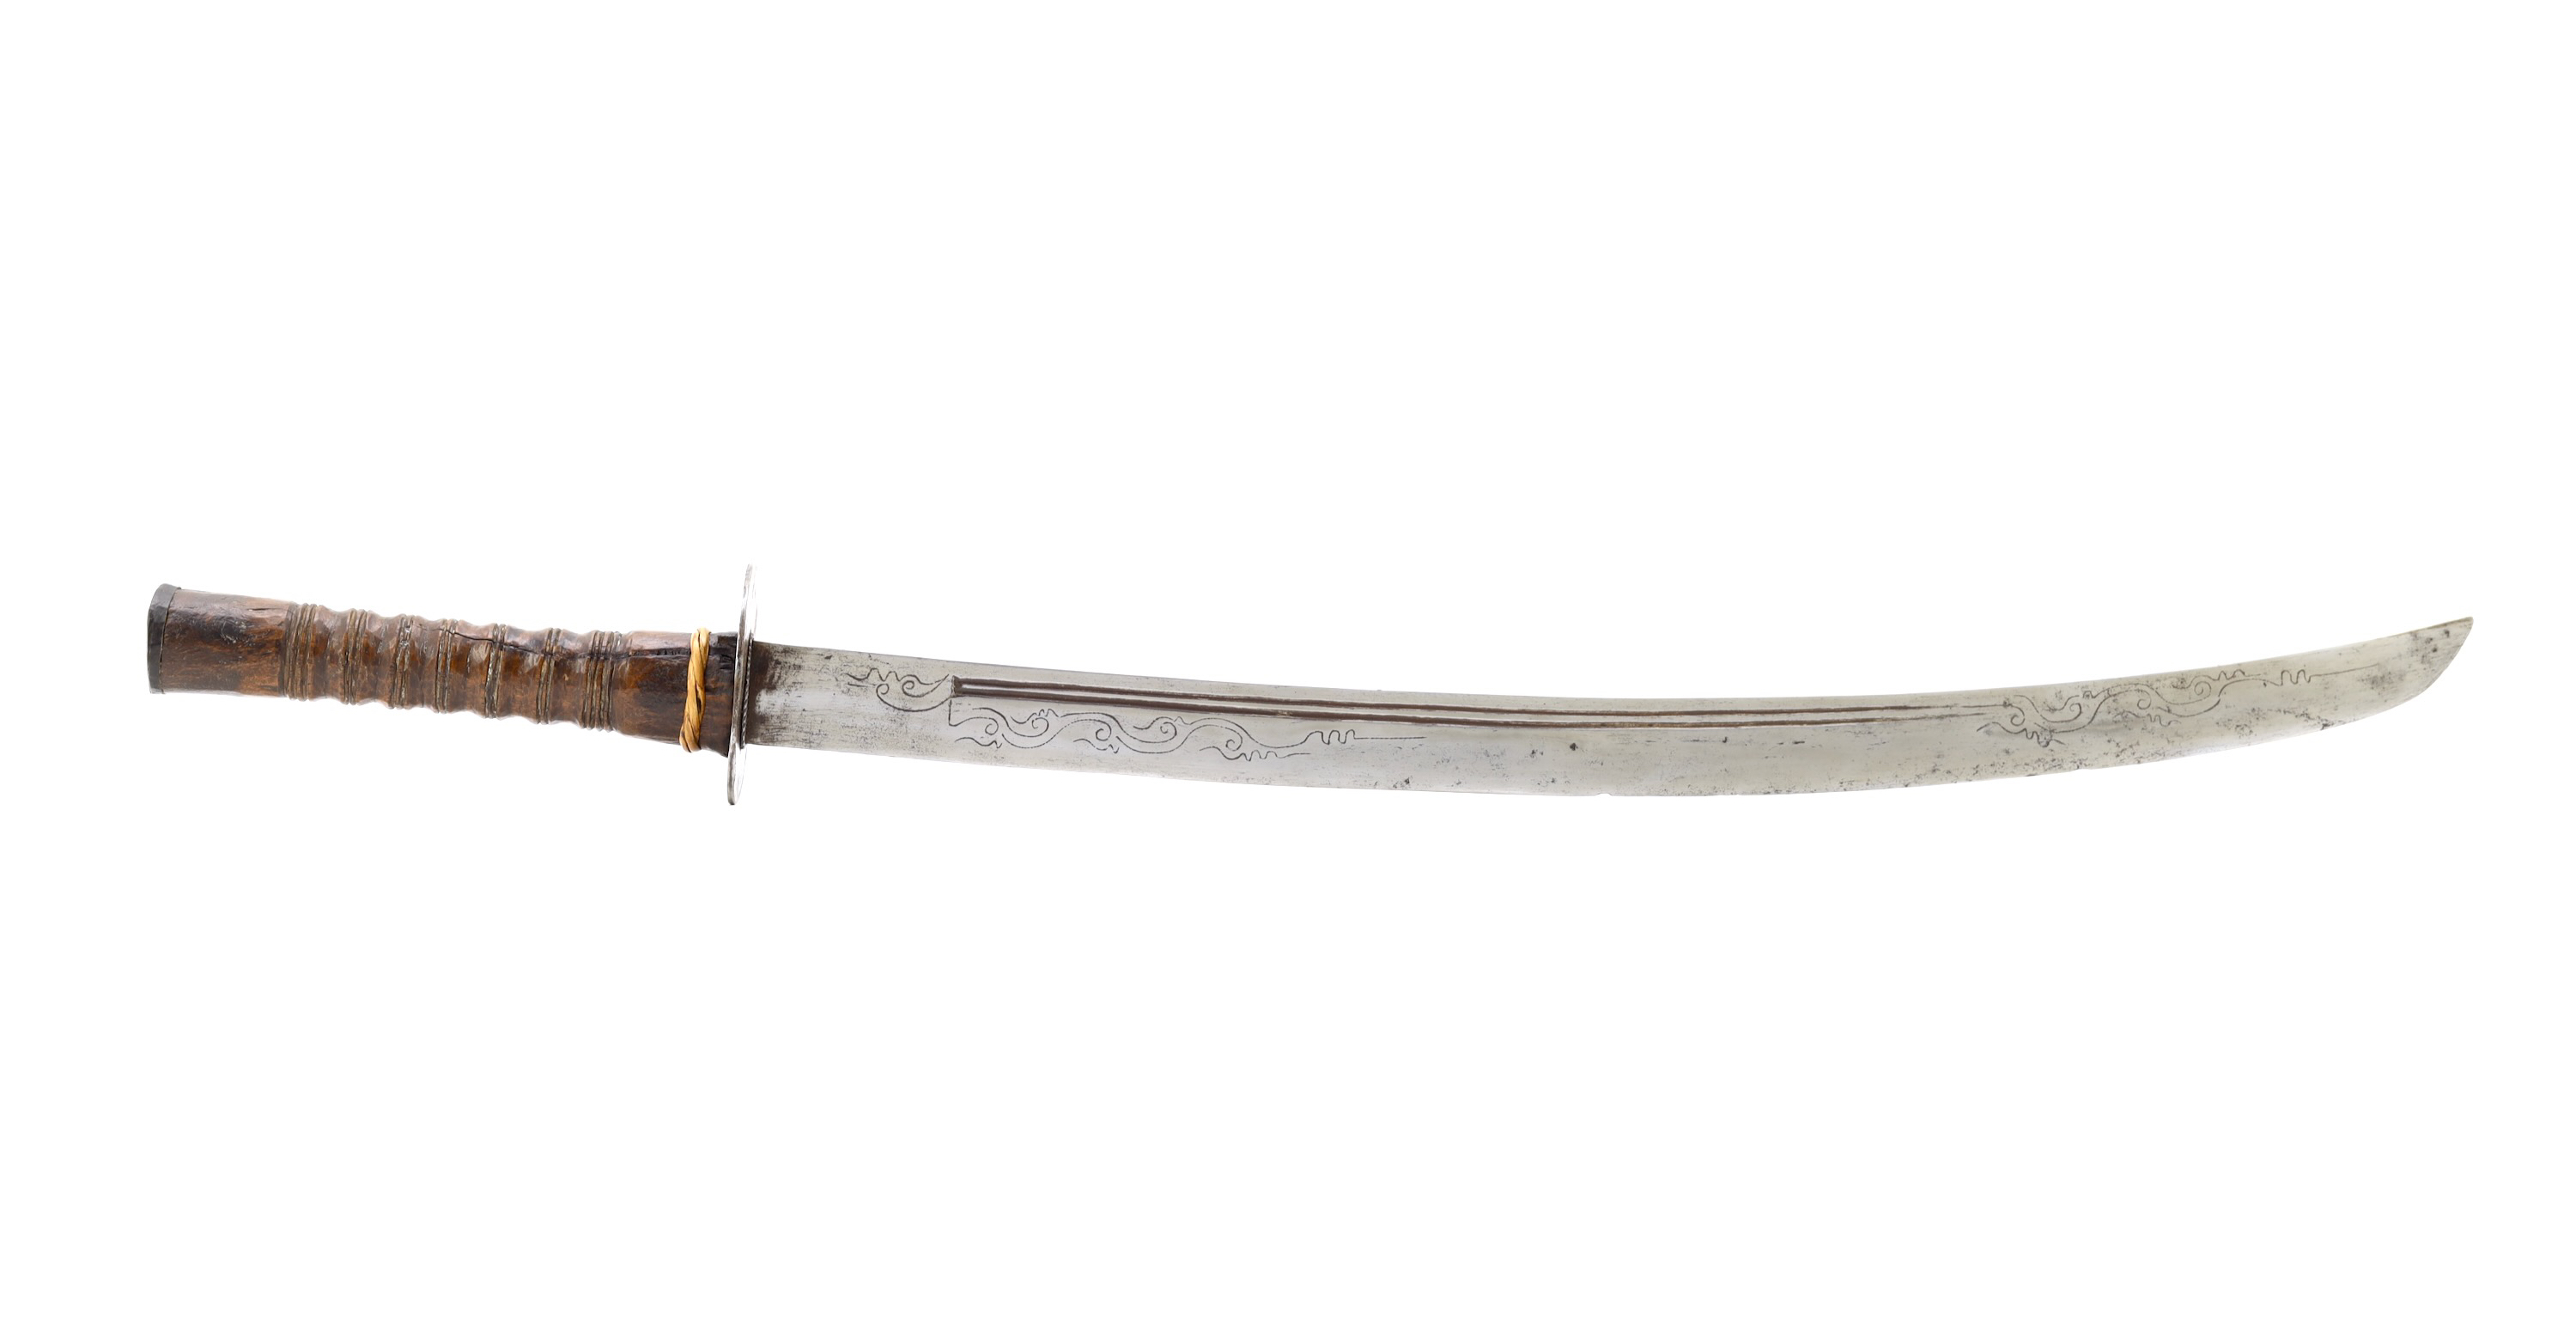 Tonkinese saber collected 1885-1887